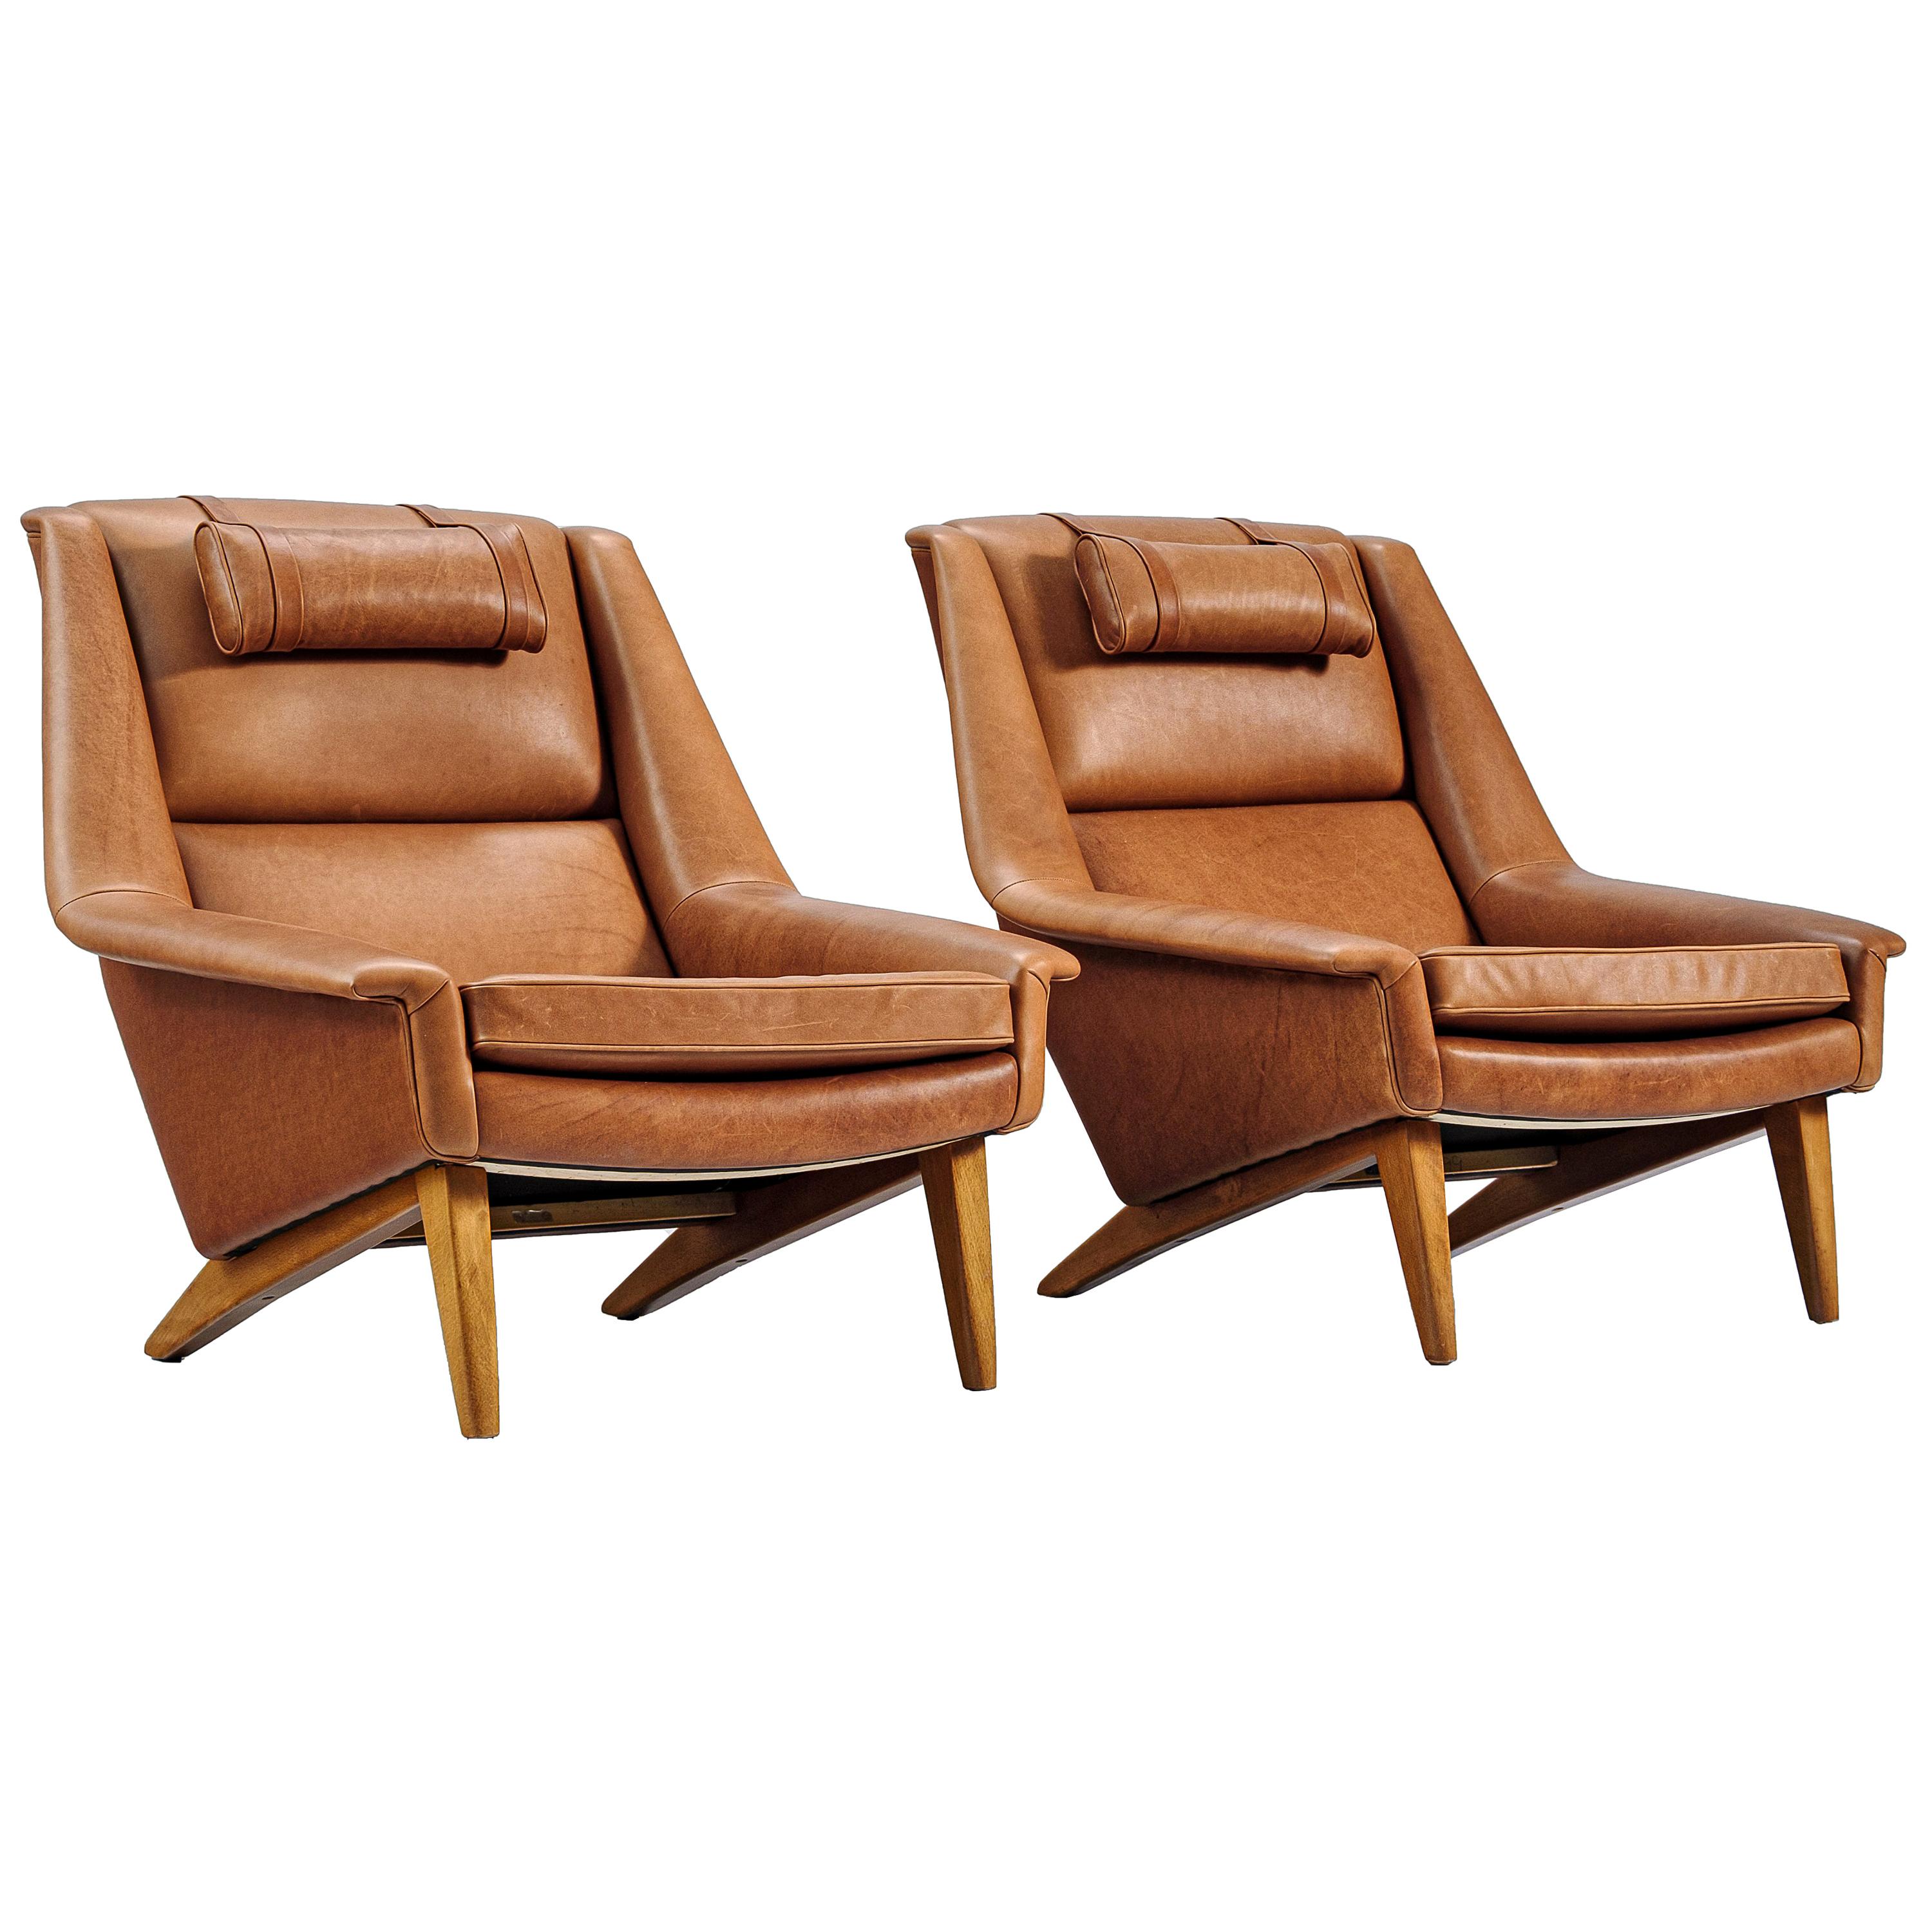 Folke Ohlsson Lounge Chair in Cognac Leather